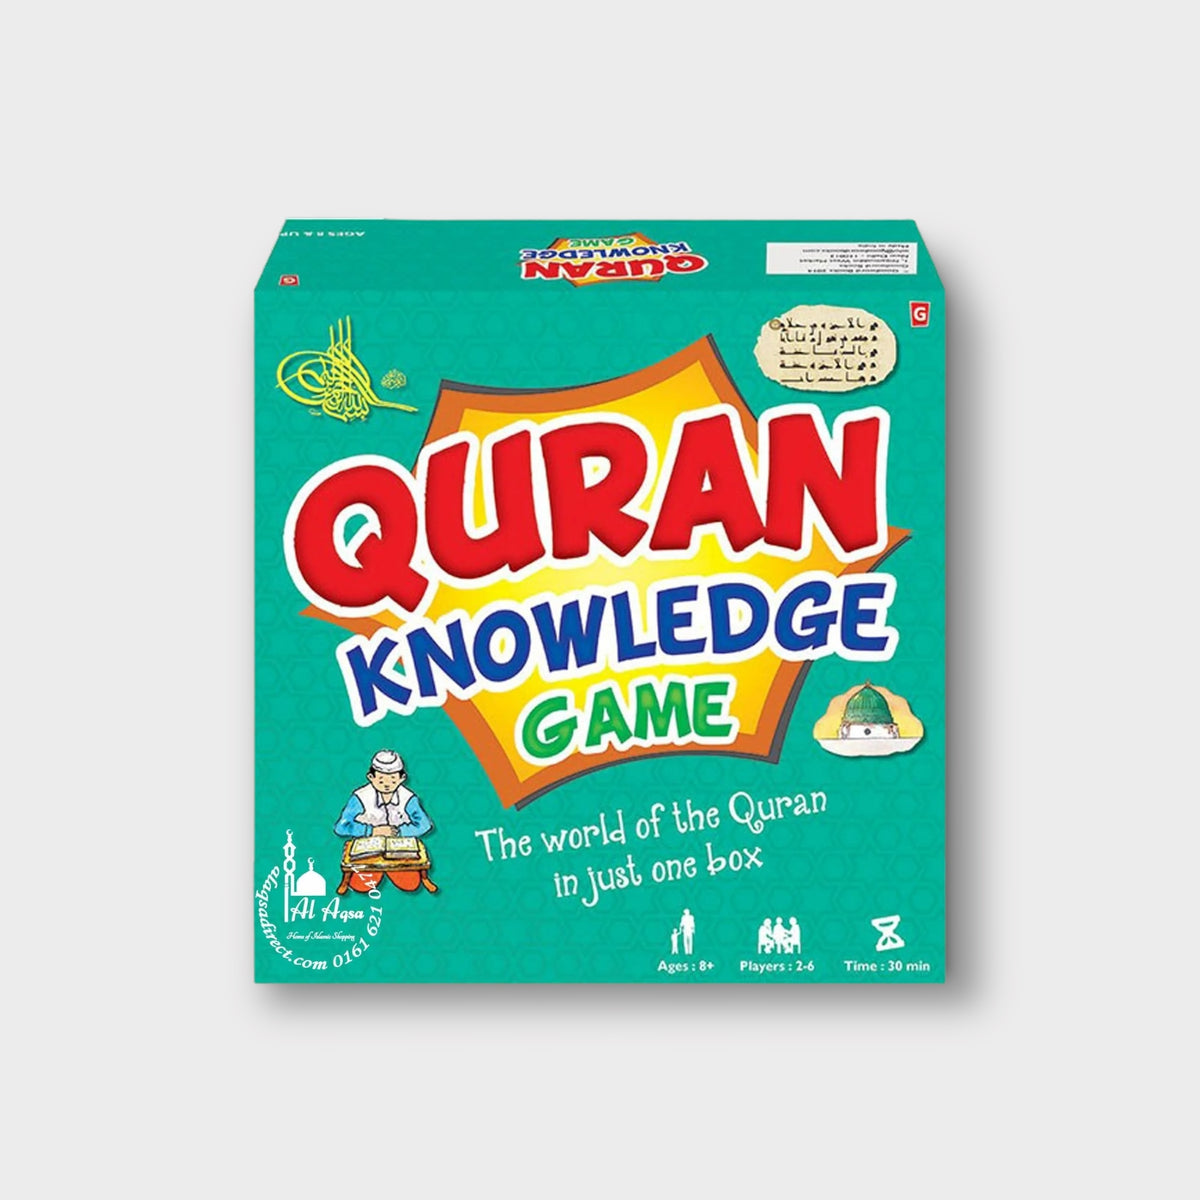 The Quran Knowledge Game